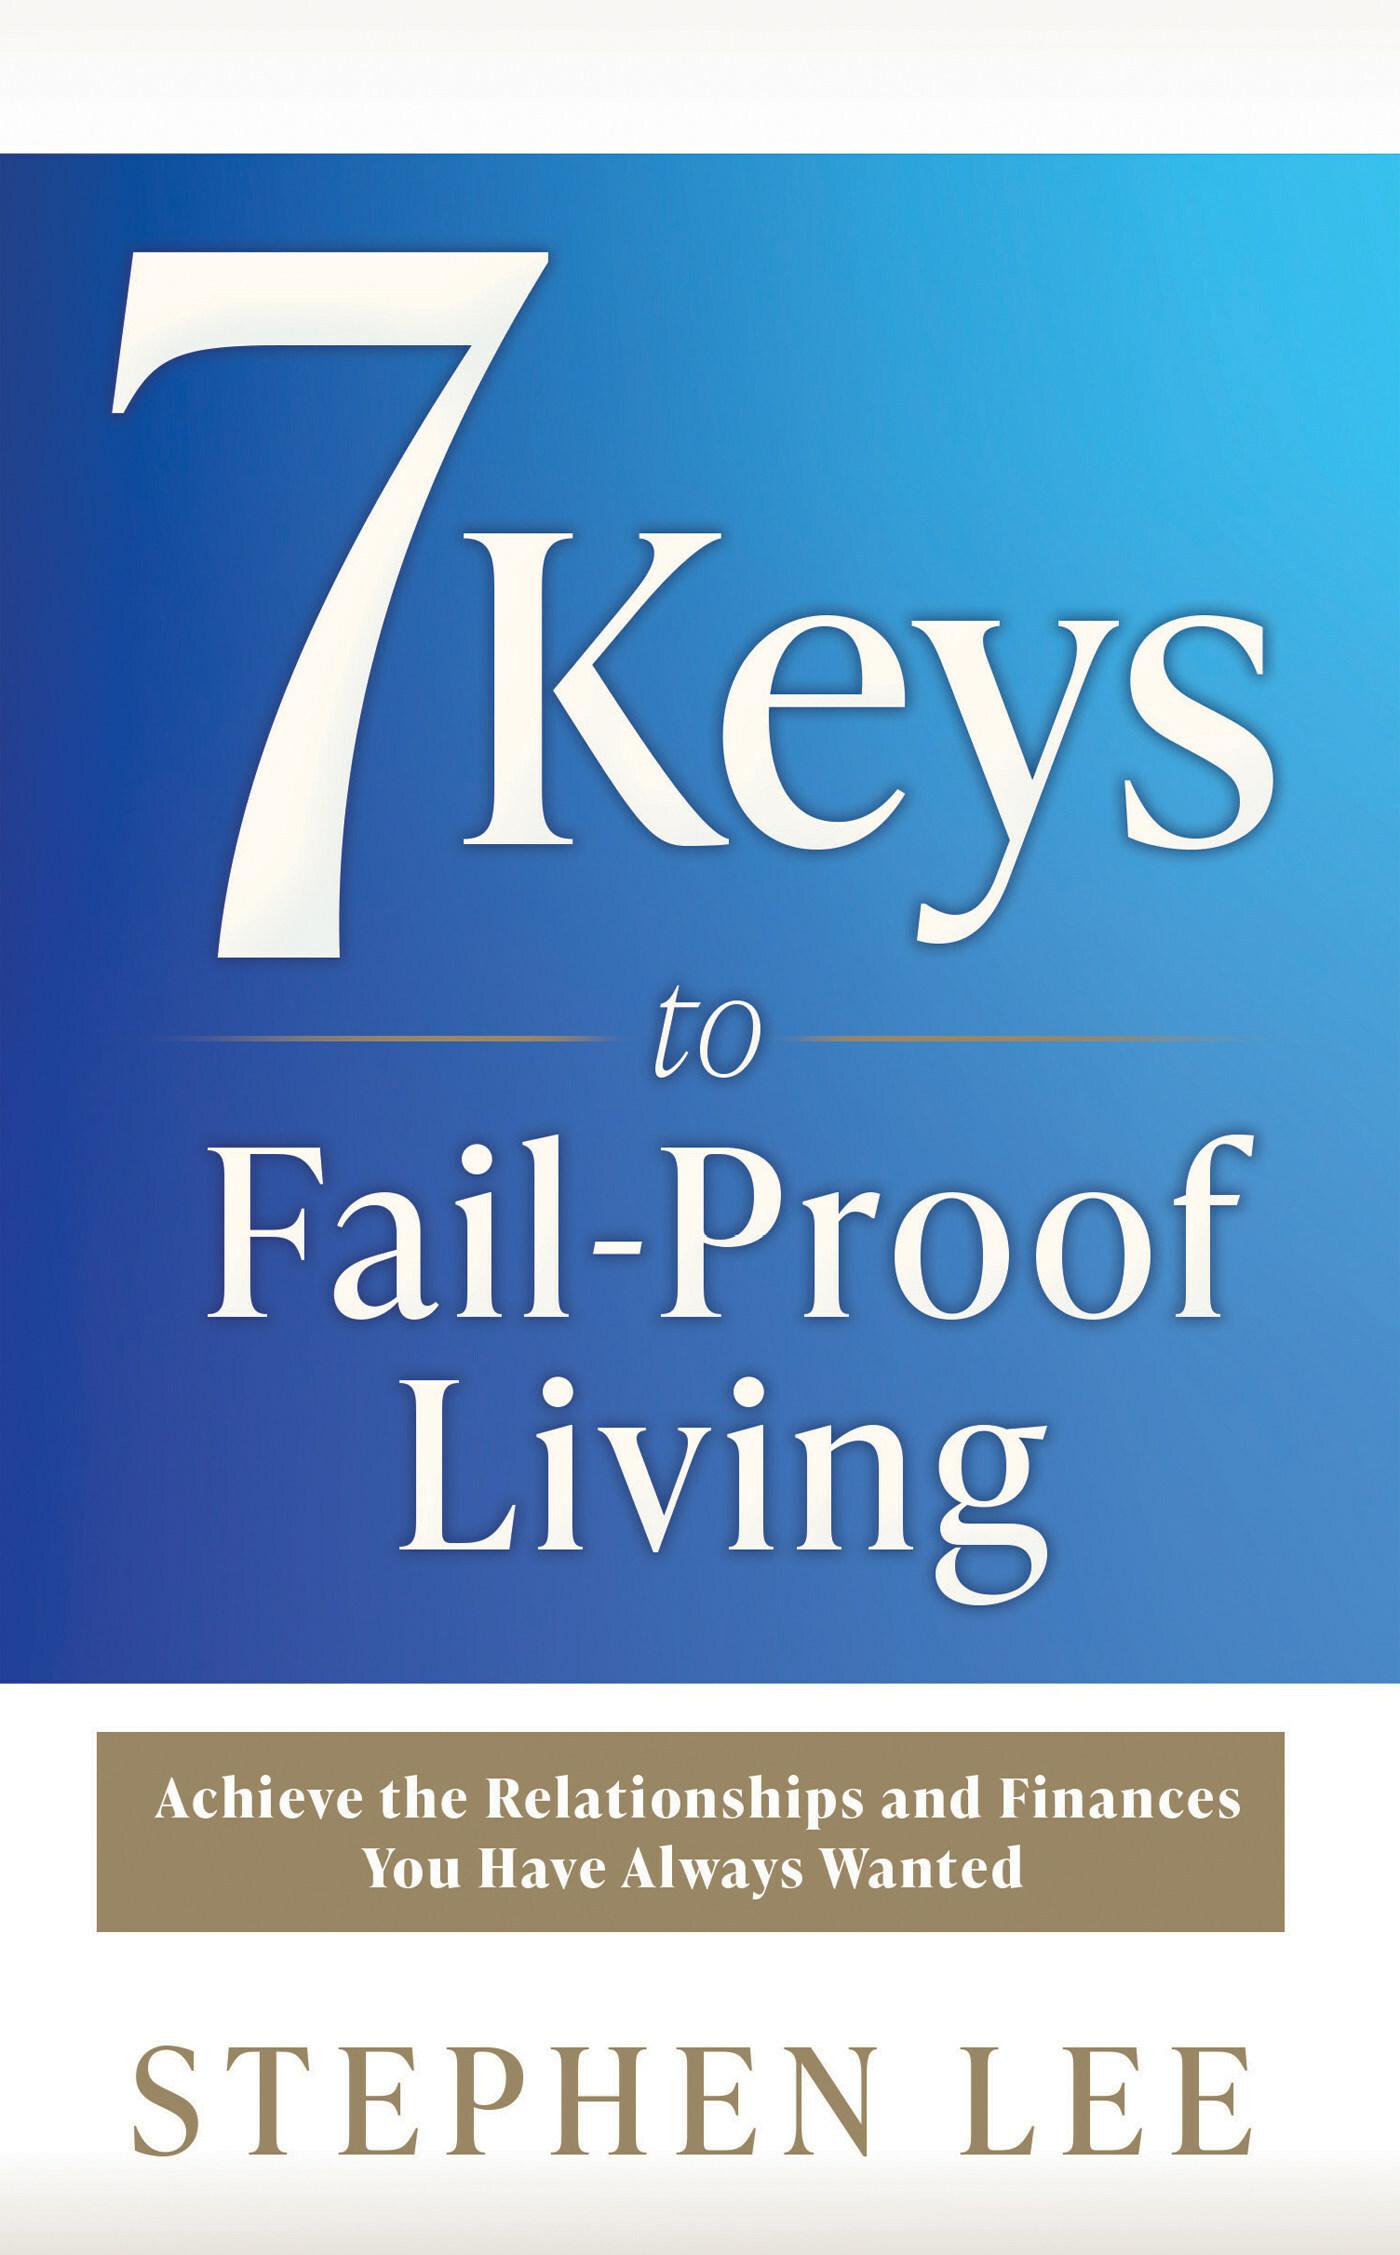 Critical Keys to Improving Finances and Relationships, and Achieve the Life You Deserve